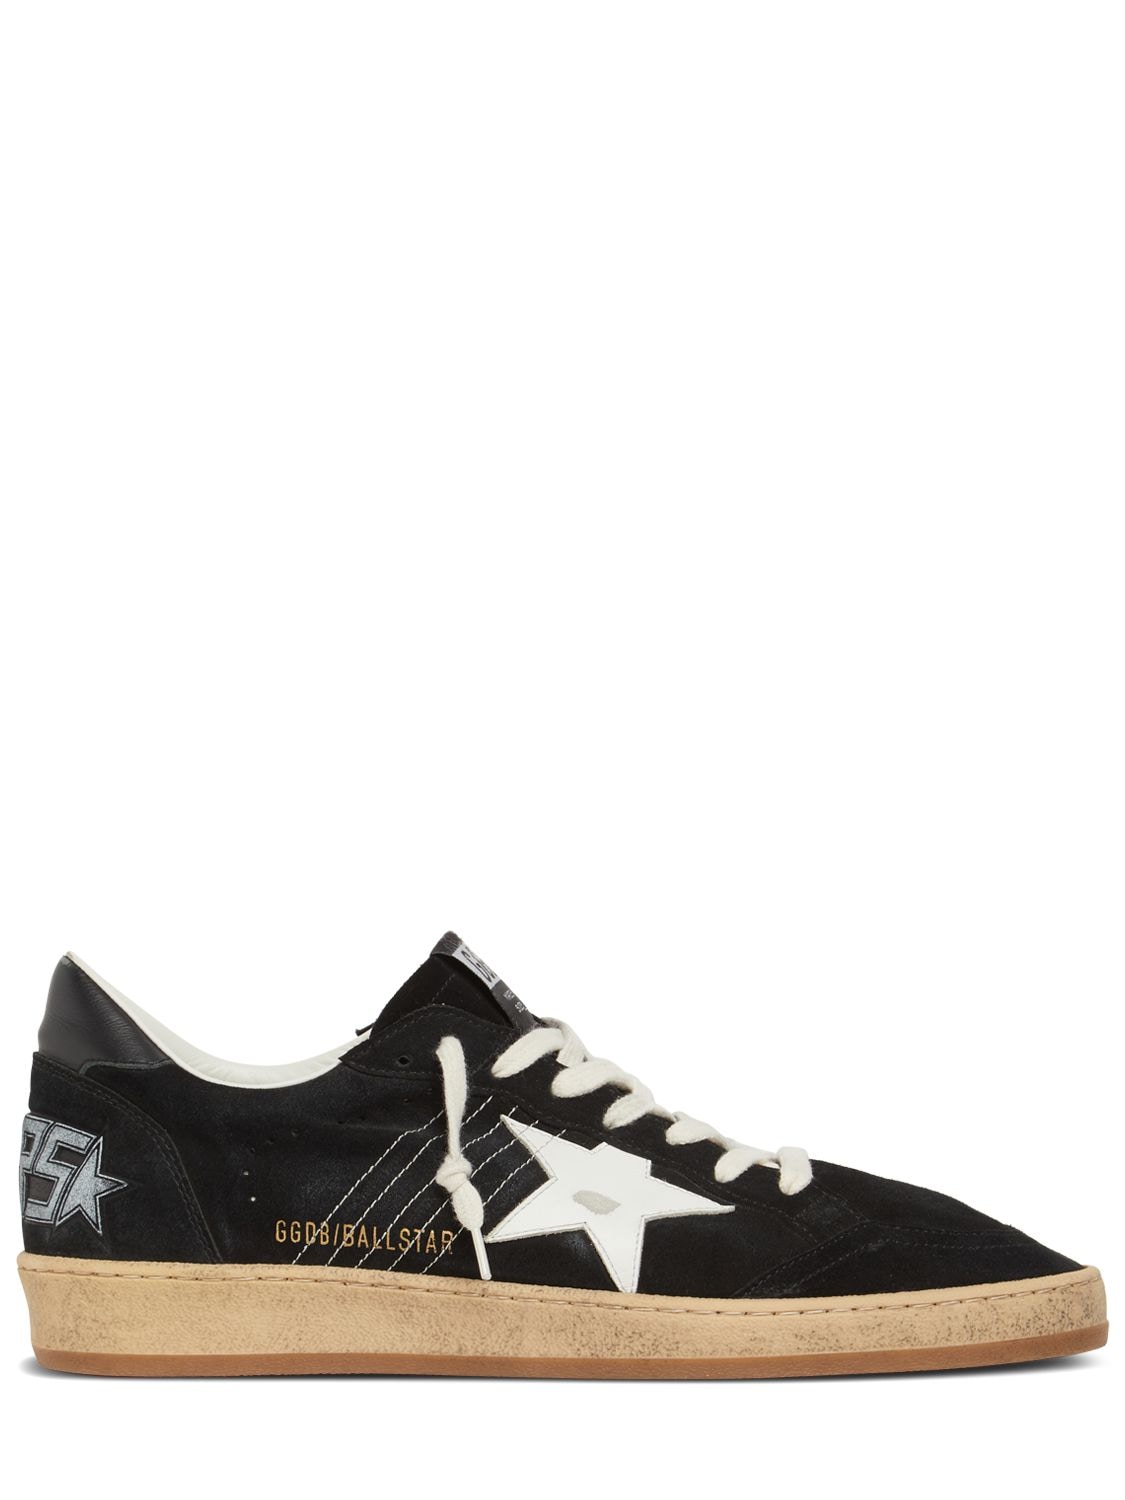 Image of Ball Star Suede Sneakers